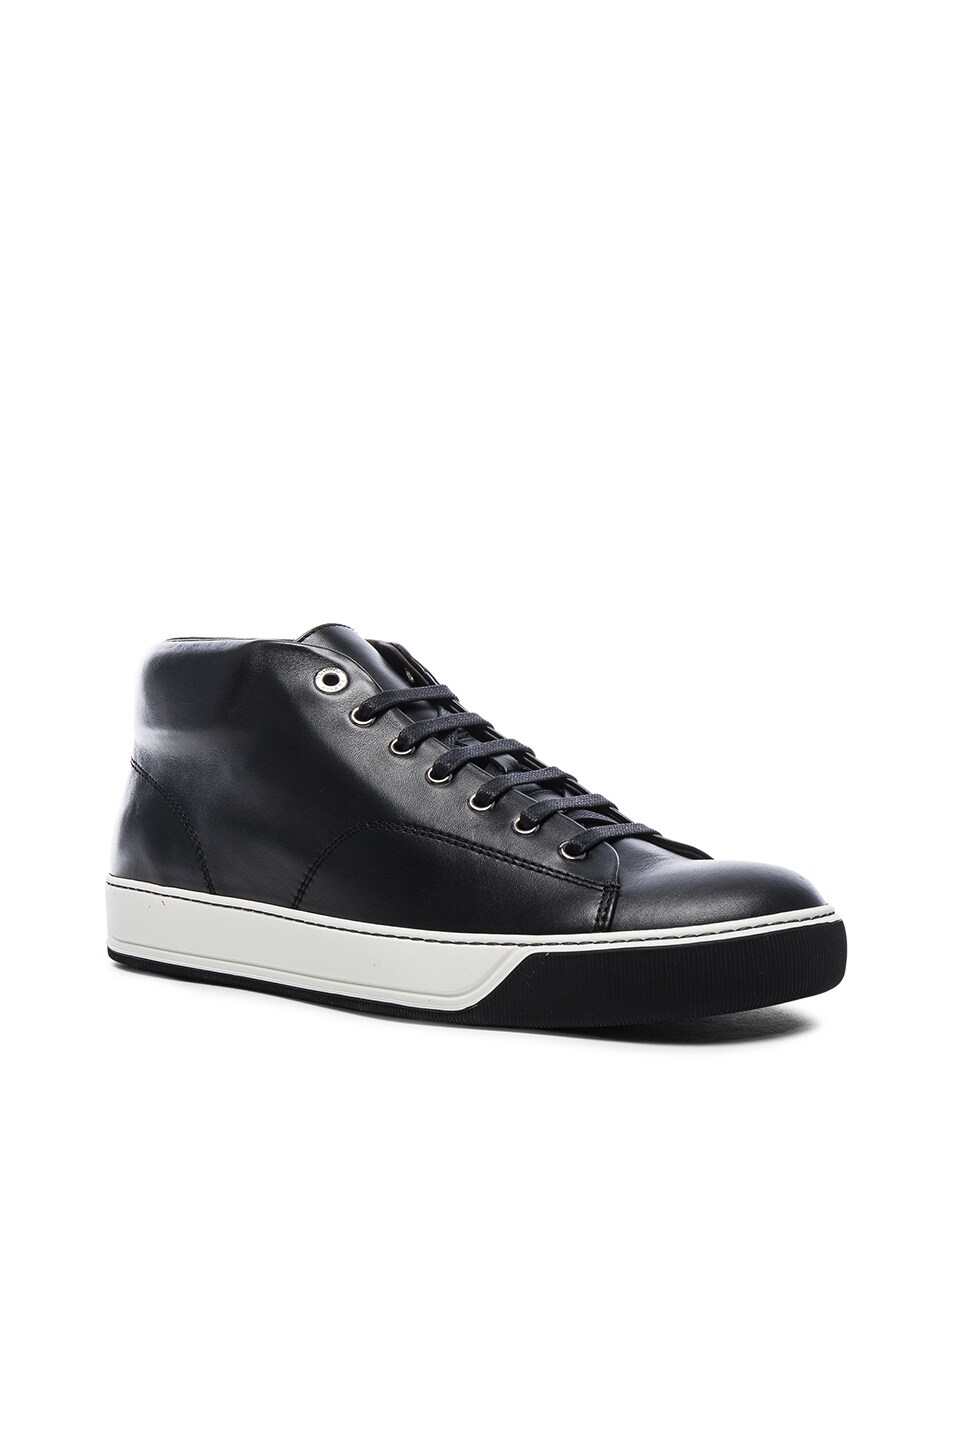 Lanvin Nappa Leather Mid Top Sneakers in Black | FWRD